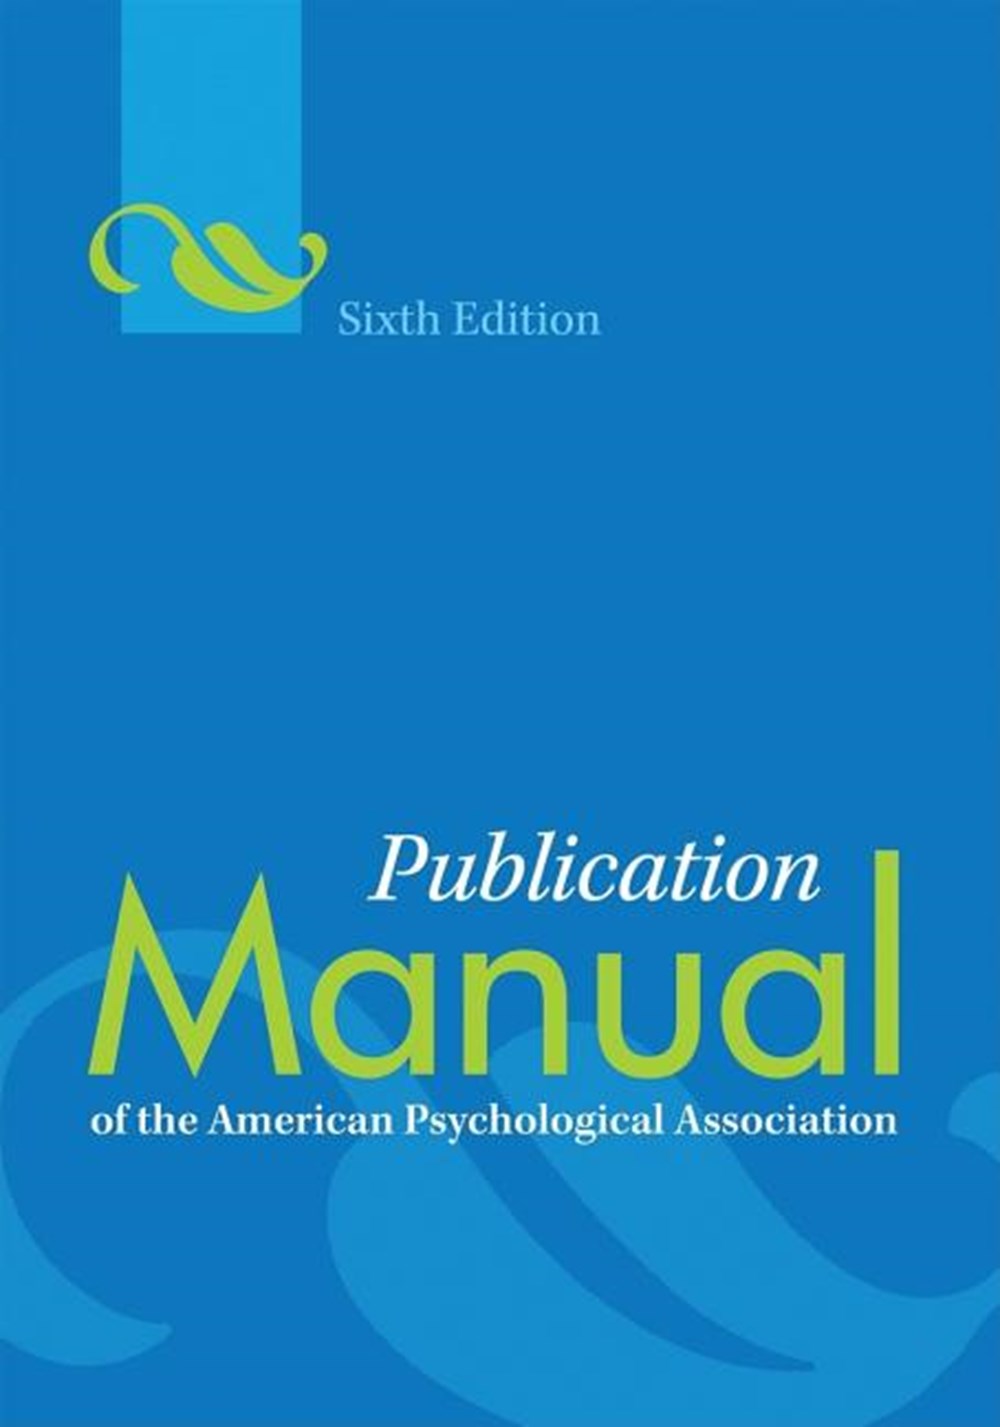 Publication Manual of the American Psychological Association(r)